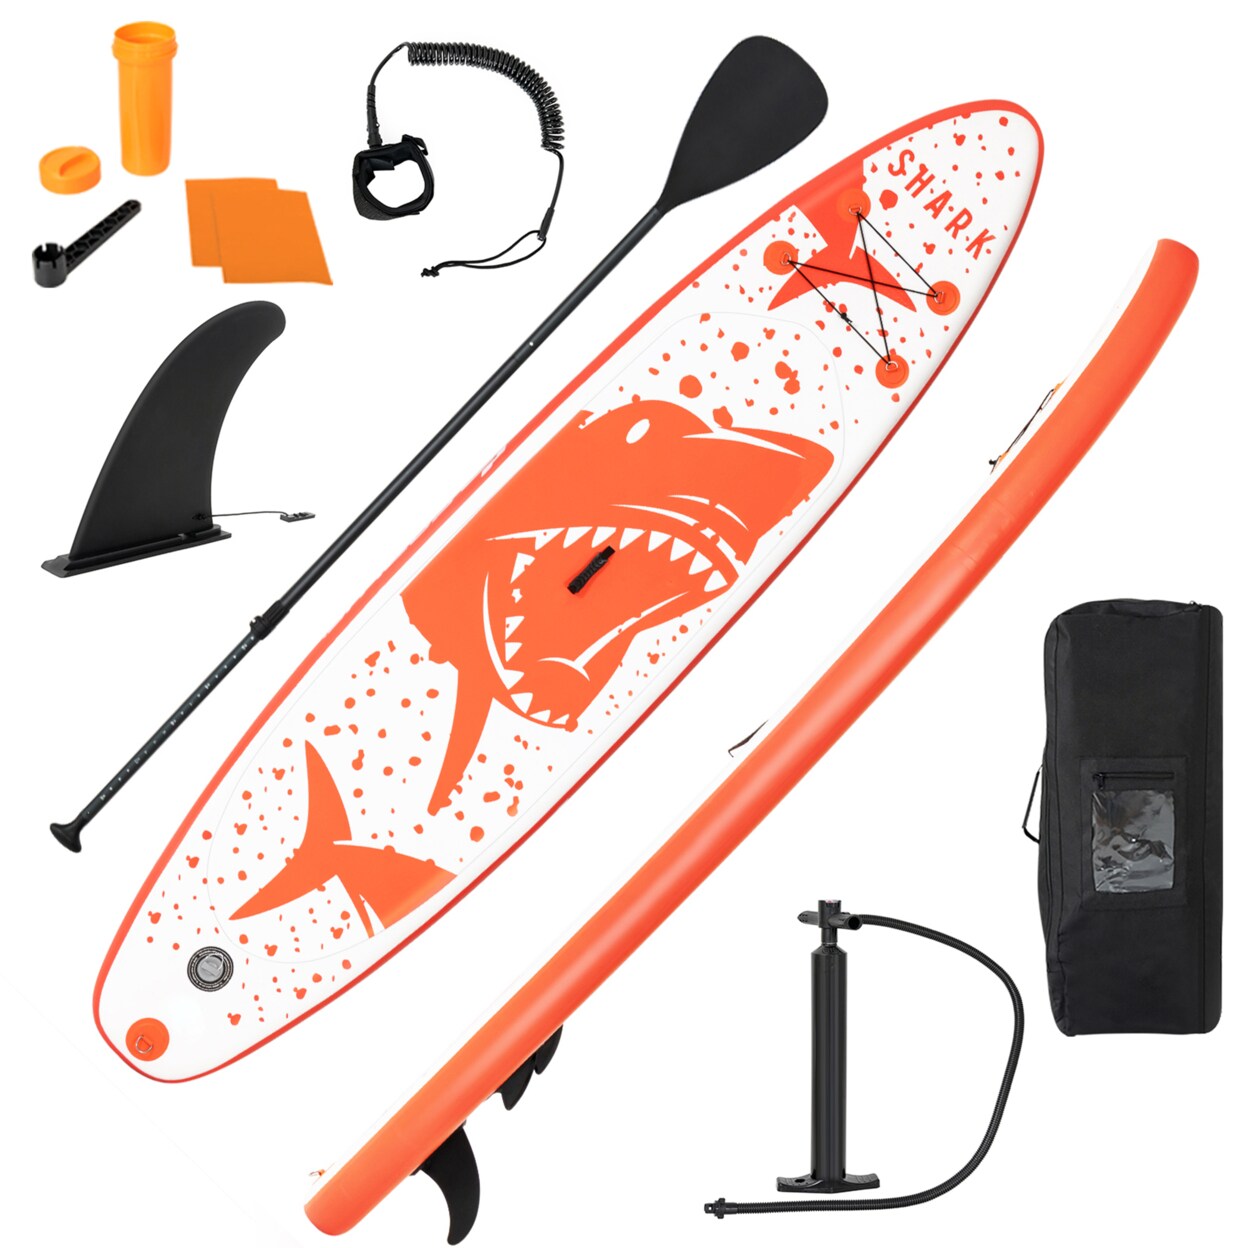 Gymax 11 Inflatable Stand-Up Paddle Board Non-Slip Deck Surfboard w/ Hand Pump